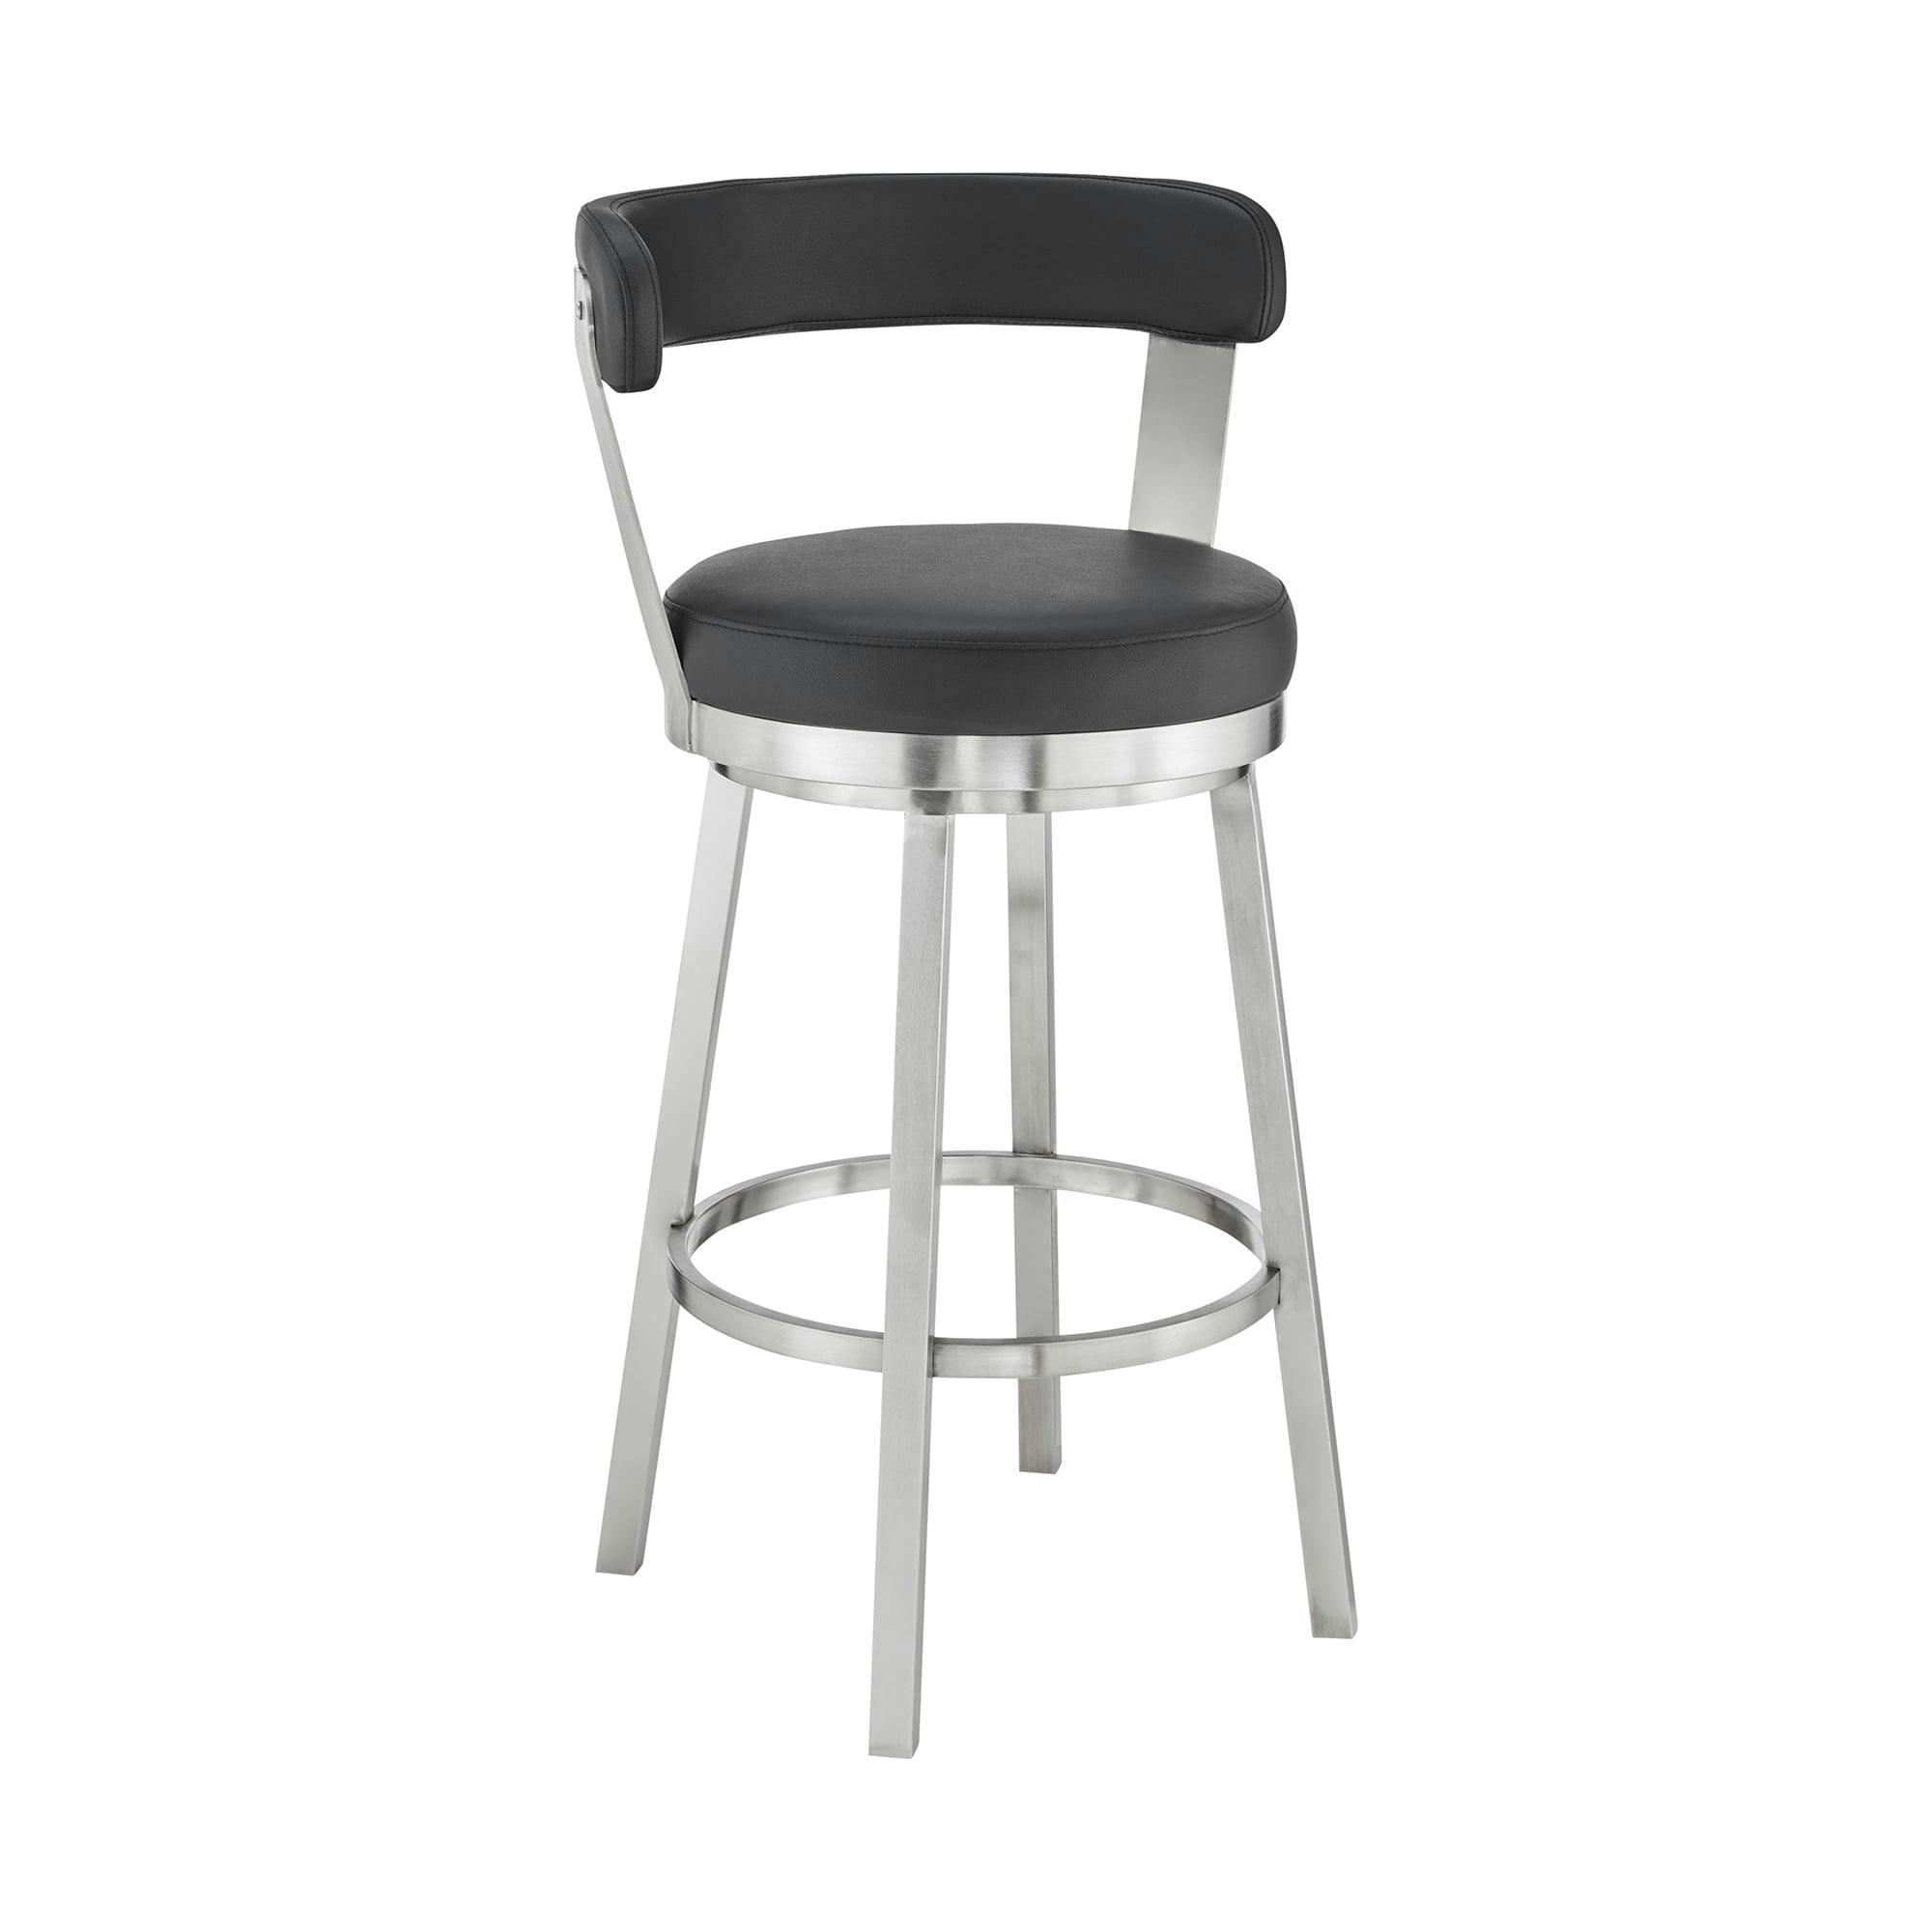 Contemporary 30" Black Faux Leather Swivel Bar Stool with Metal Base